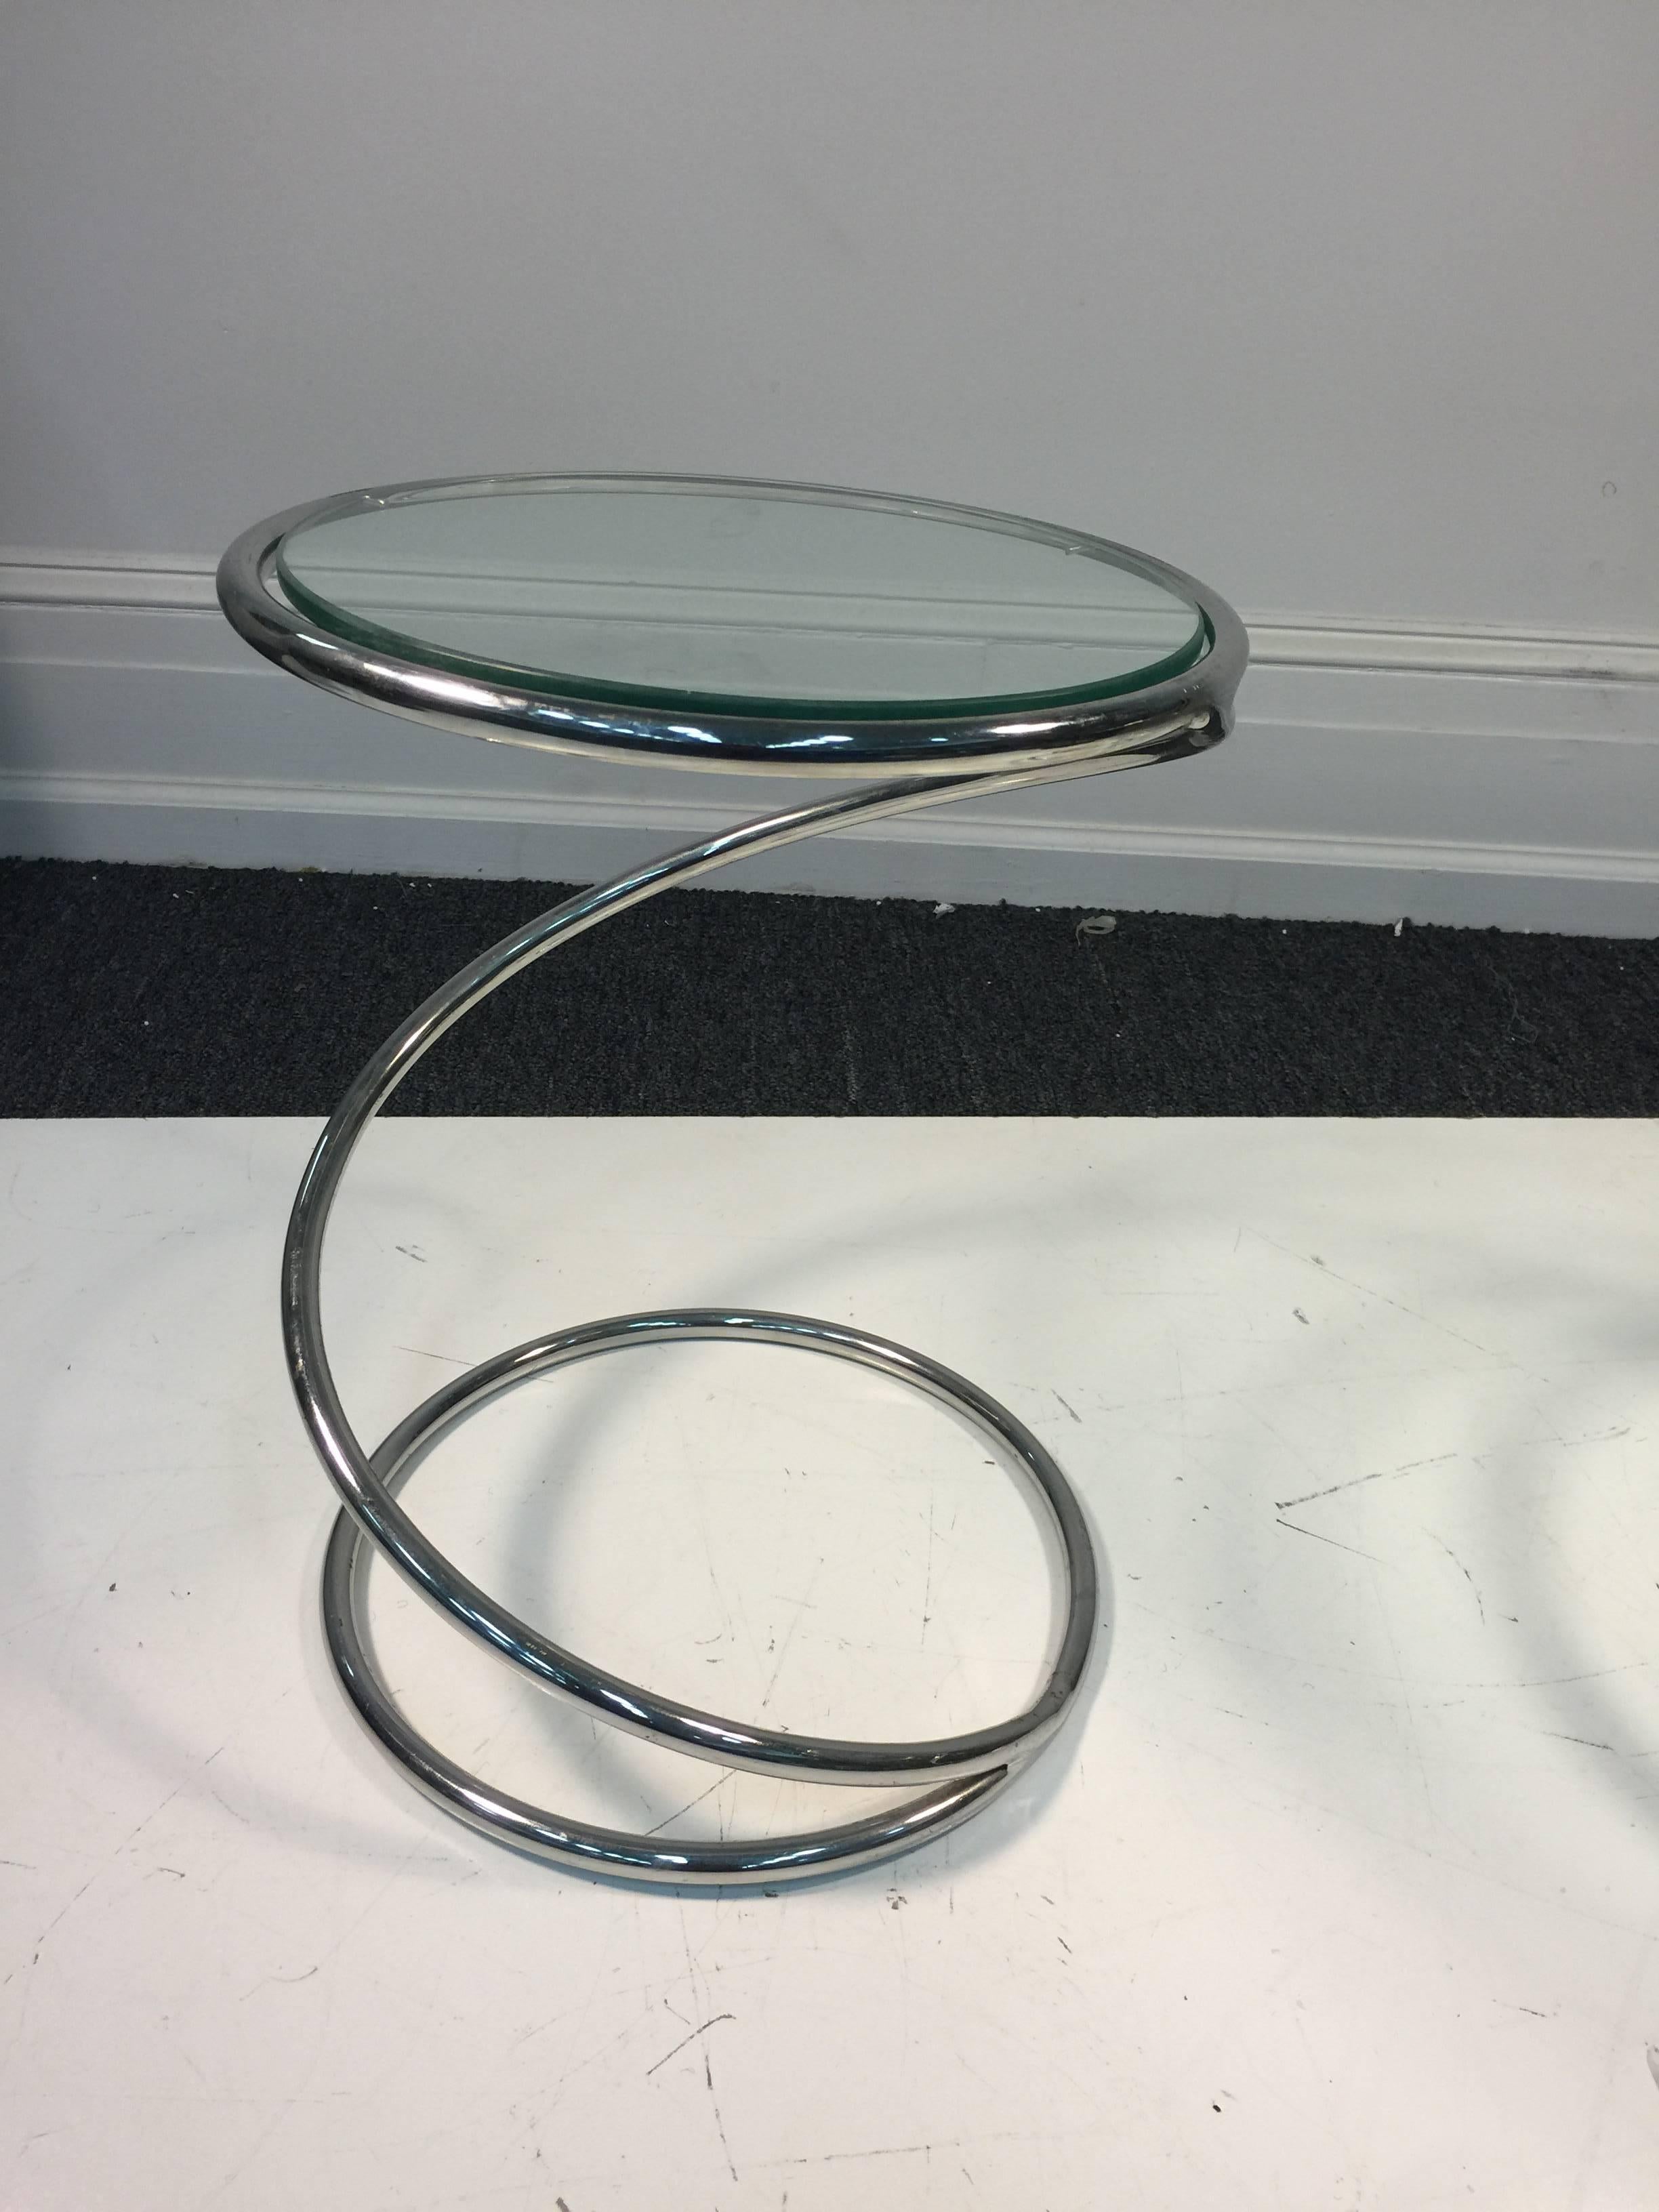 Magnificent Pair of Modernist Chrome Spiral Side Tables by Milo Baughman In Good Condition For Sale In Mount Penn, PA